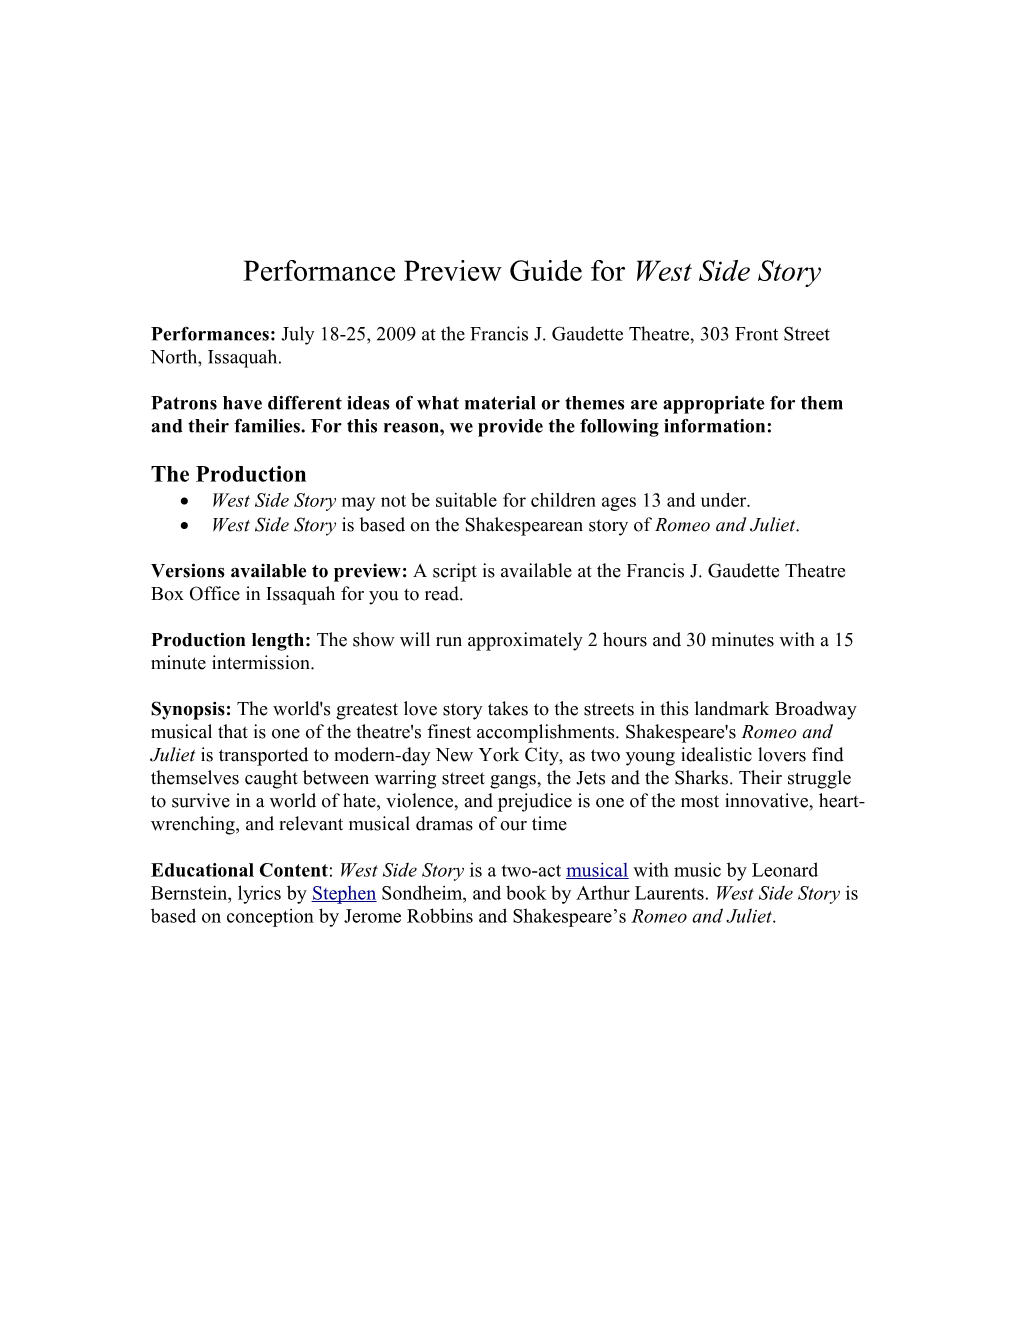 Performance Preview Guide for West Side Story